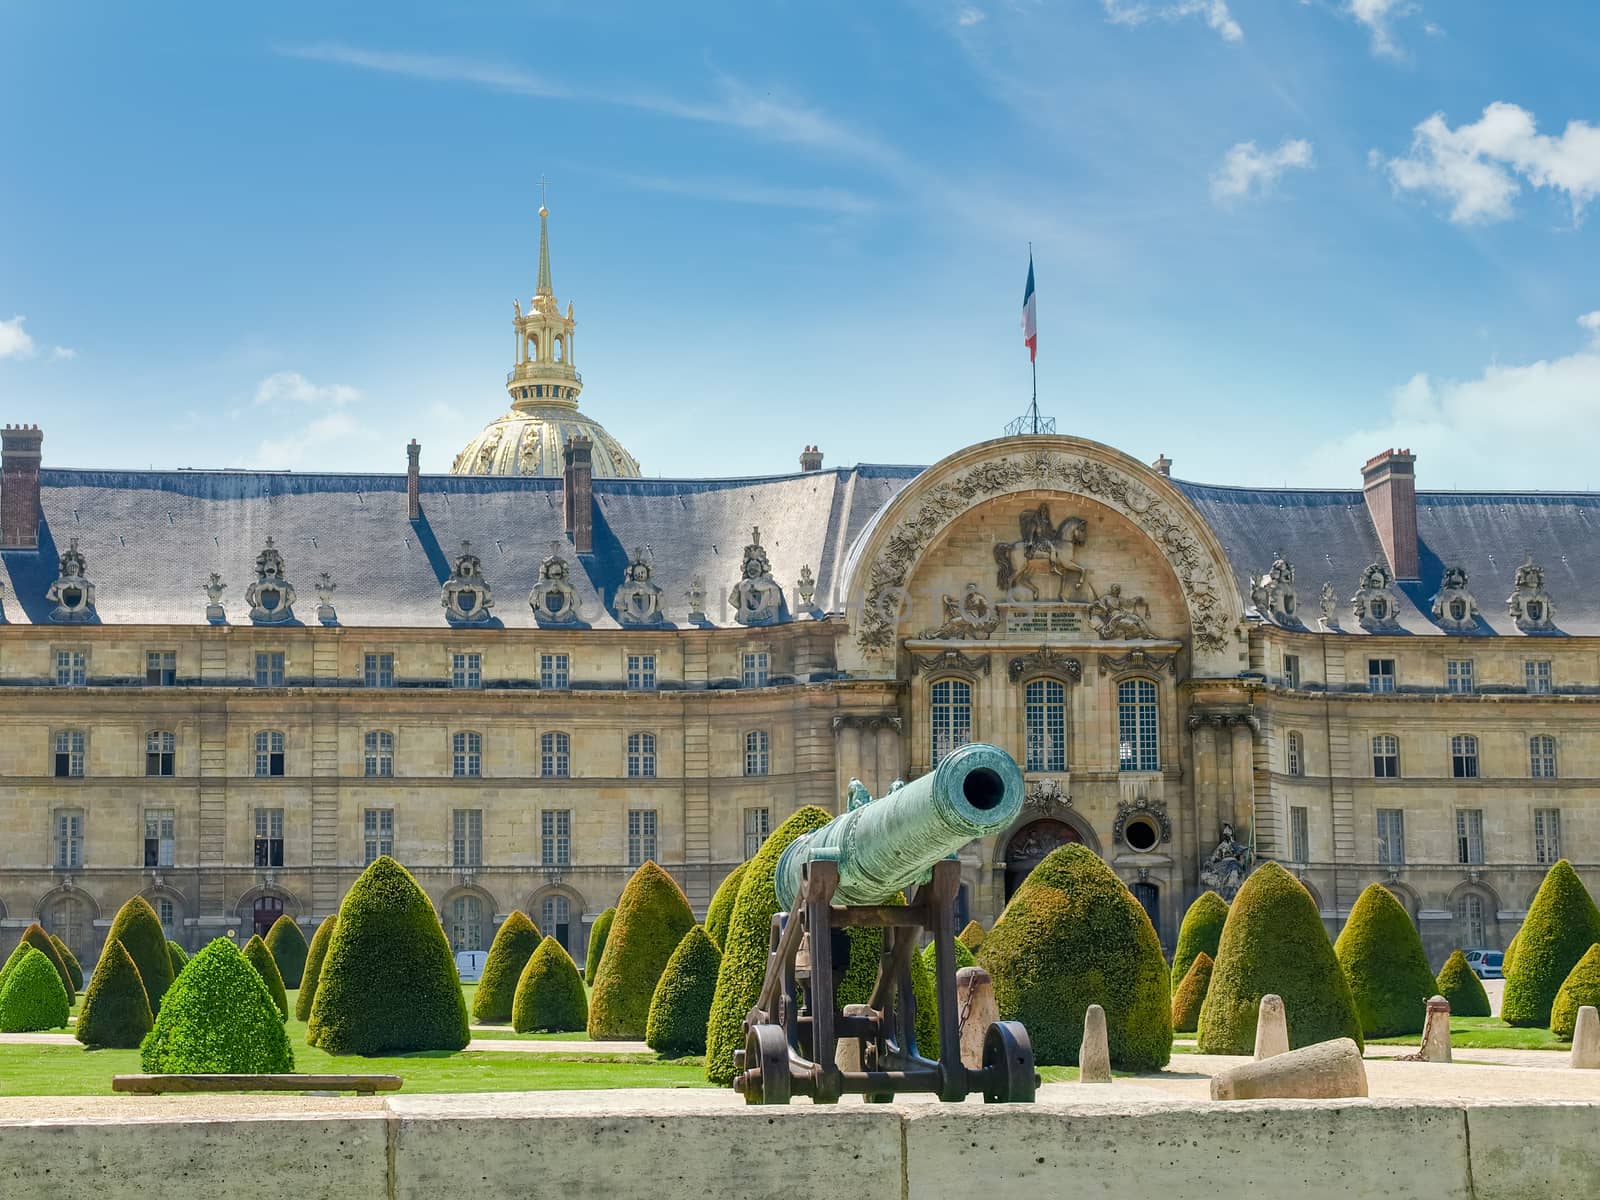 Part of the northern facade of the Hotel Des Invalides with archway of a main entrance with low-relief of King of France Louis XIV, bronze cannon and garden in the foreground in Paris
